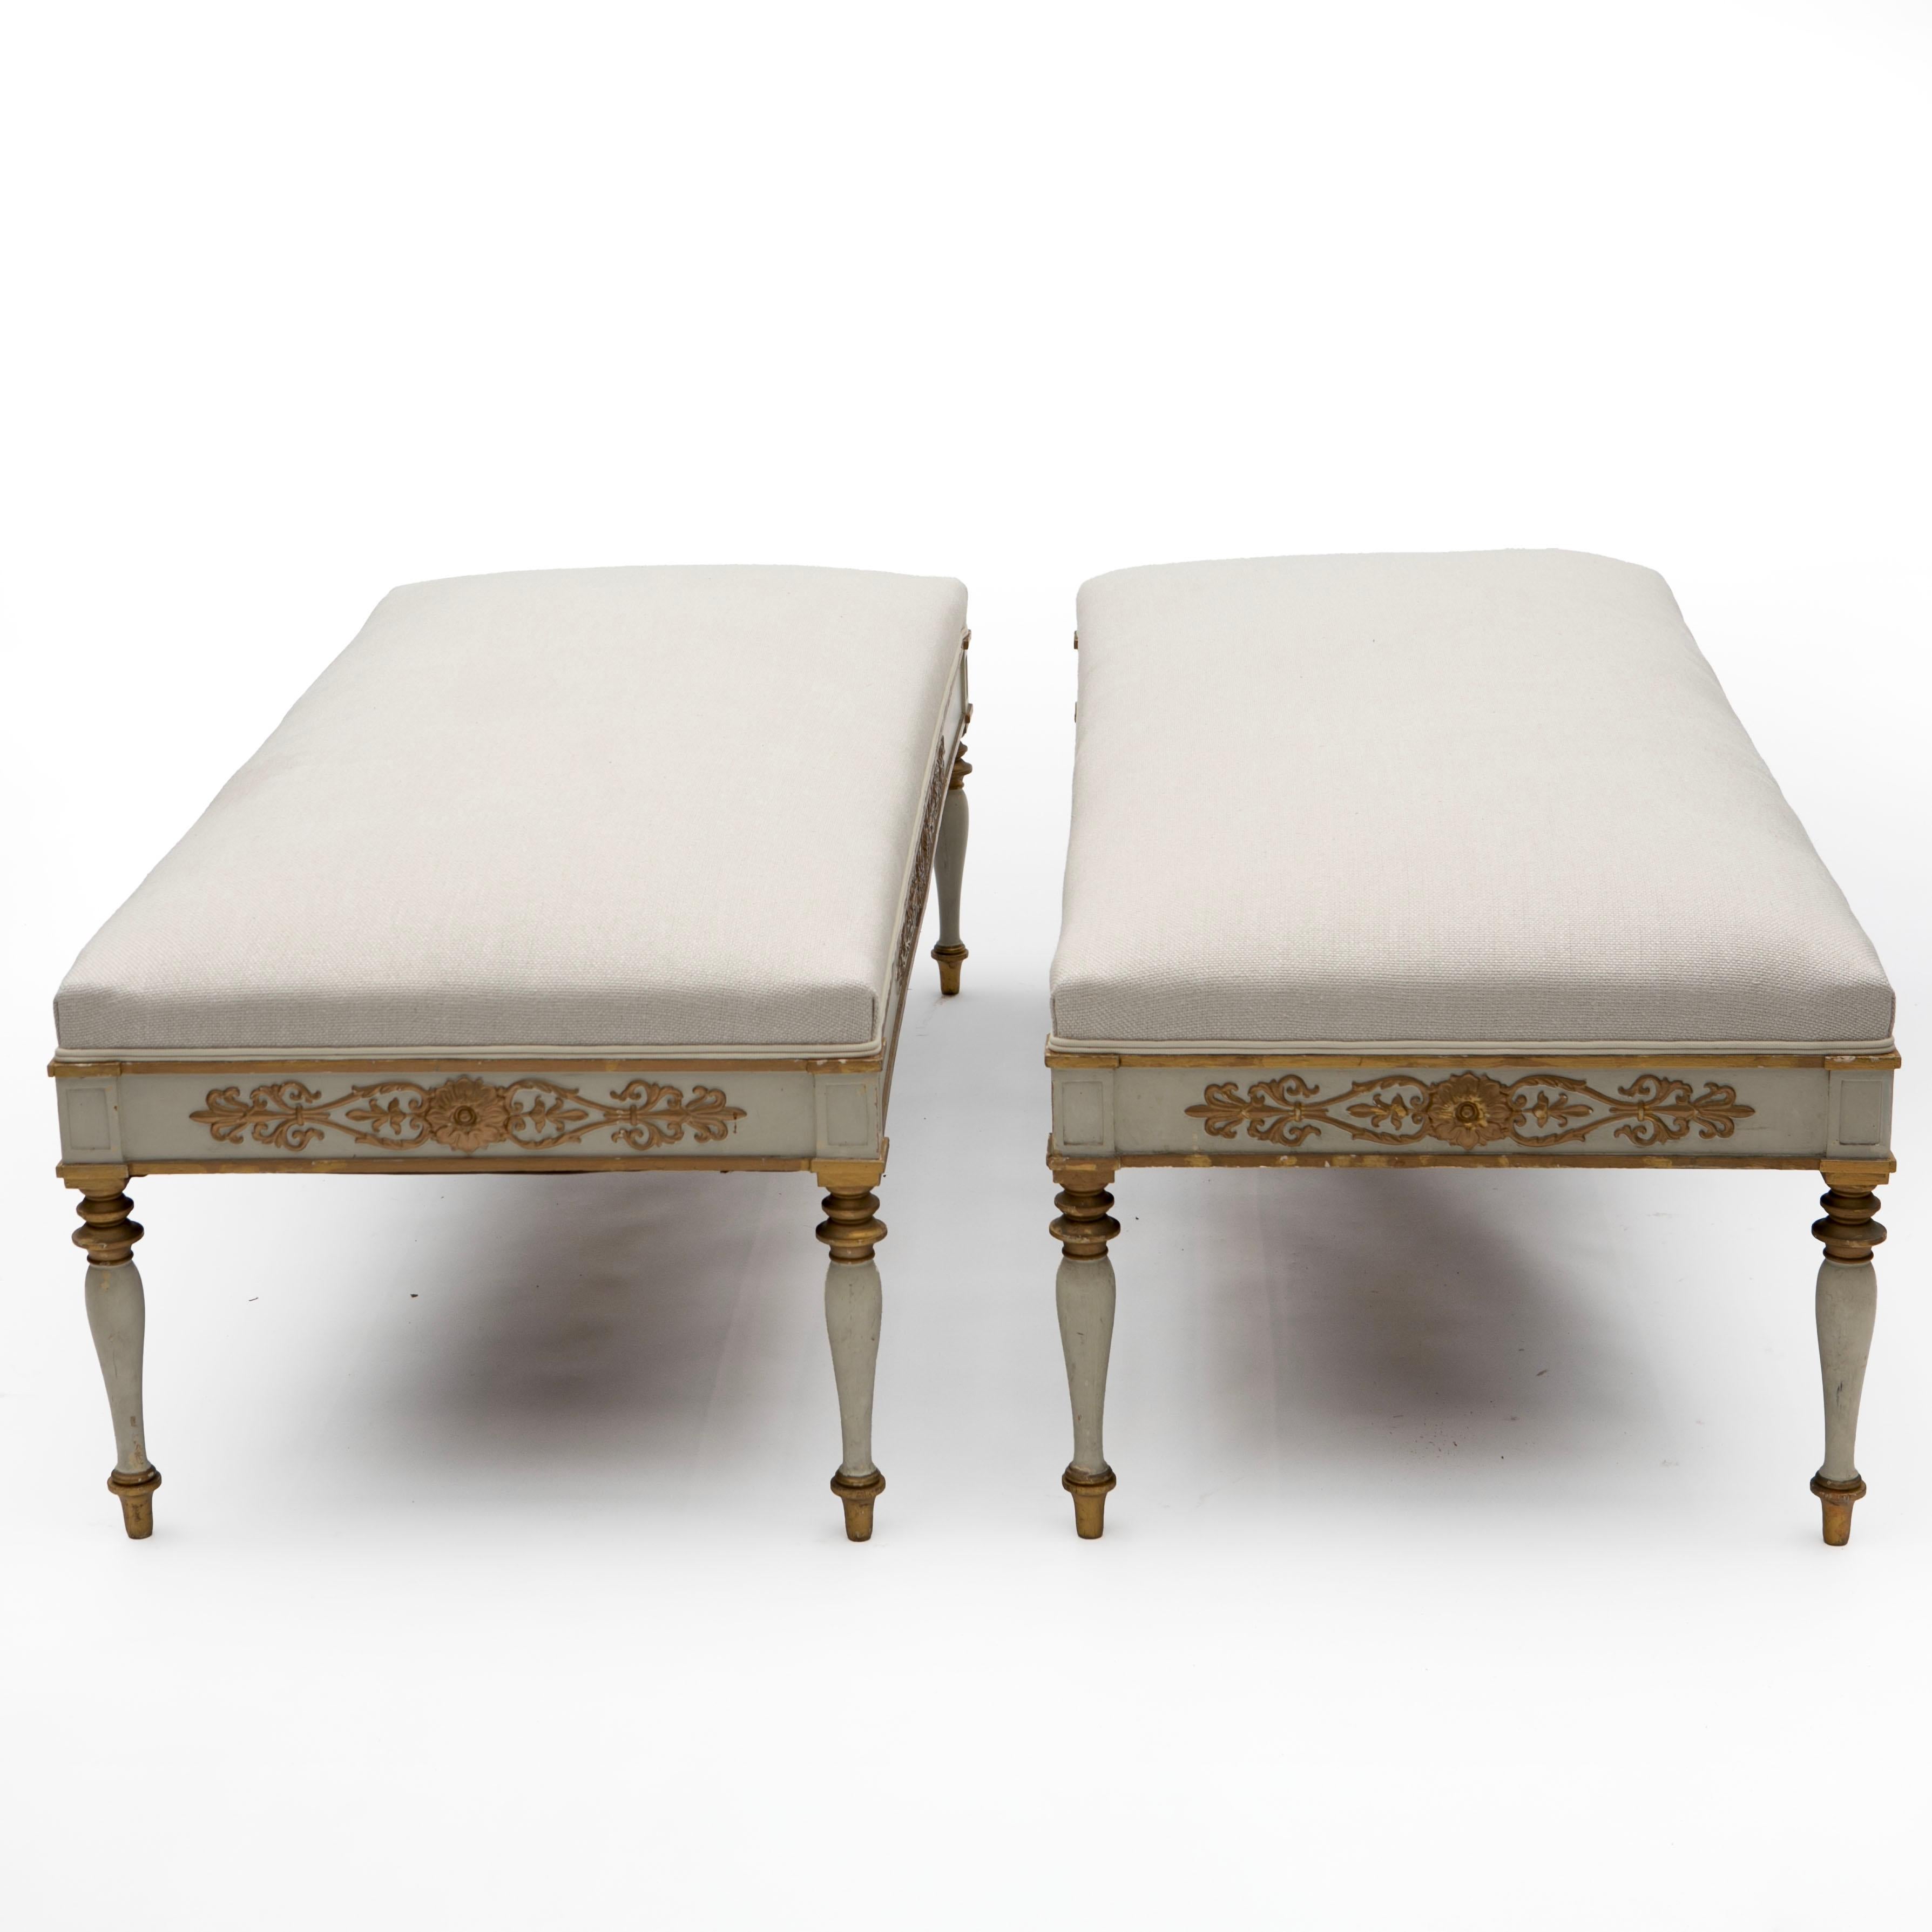 Late Empire Upholstered Bench with Carved Gilt Carvings For Sale 1